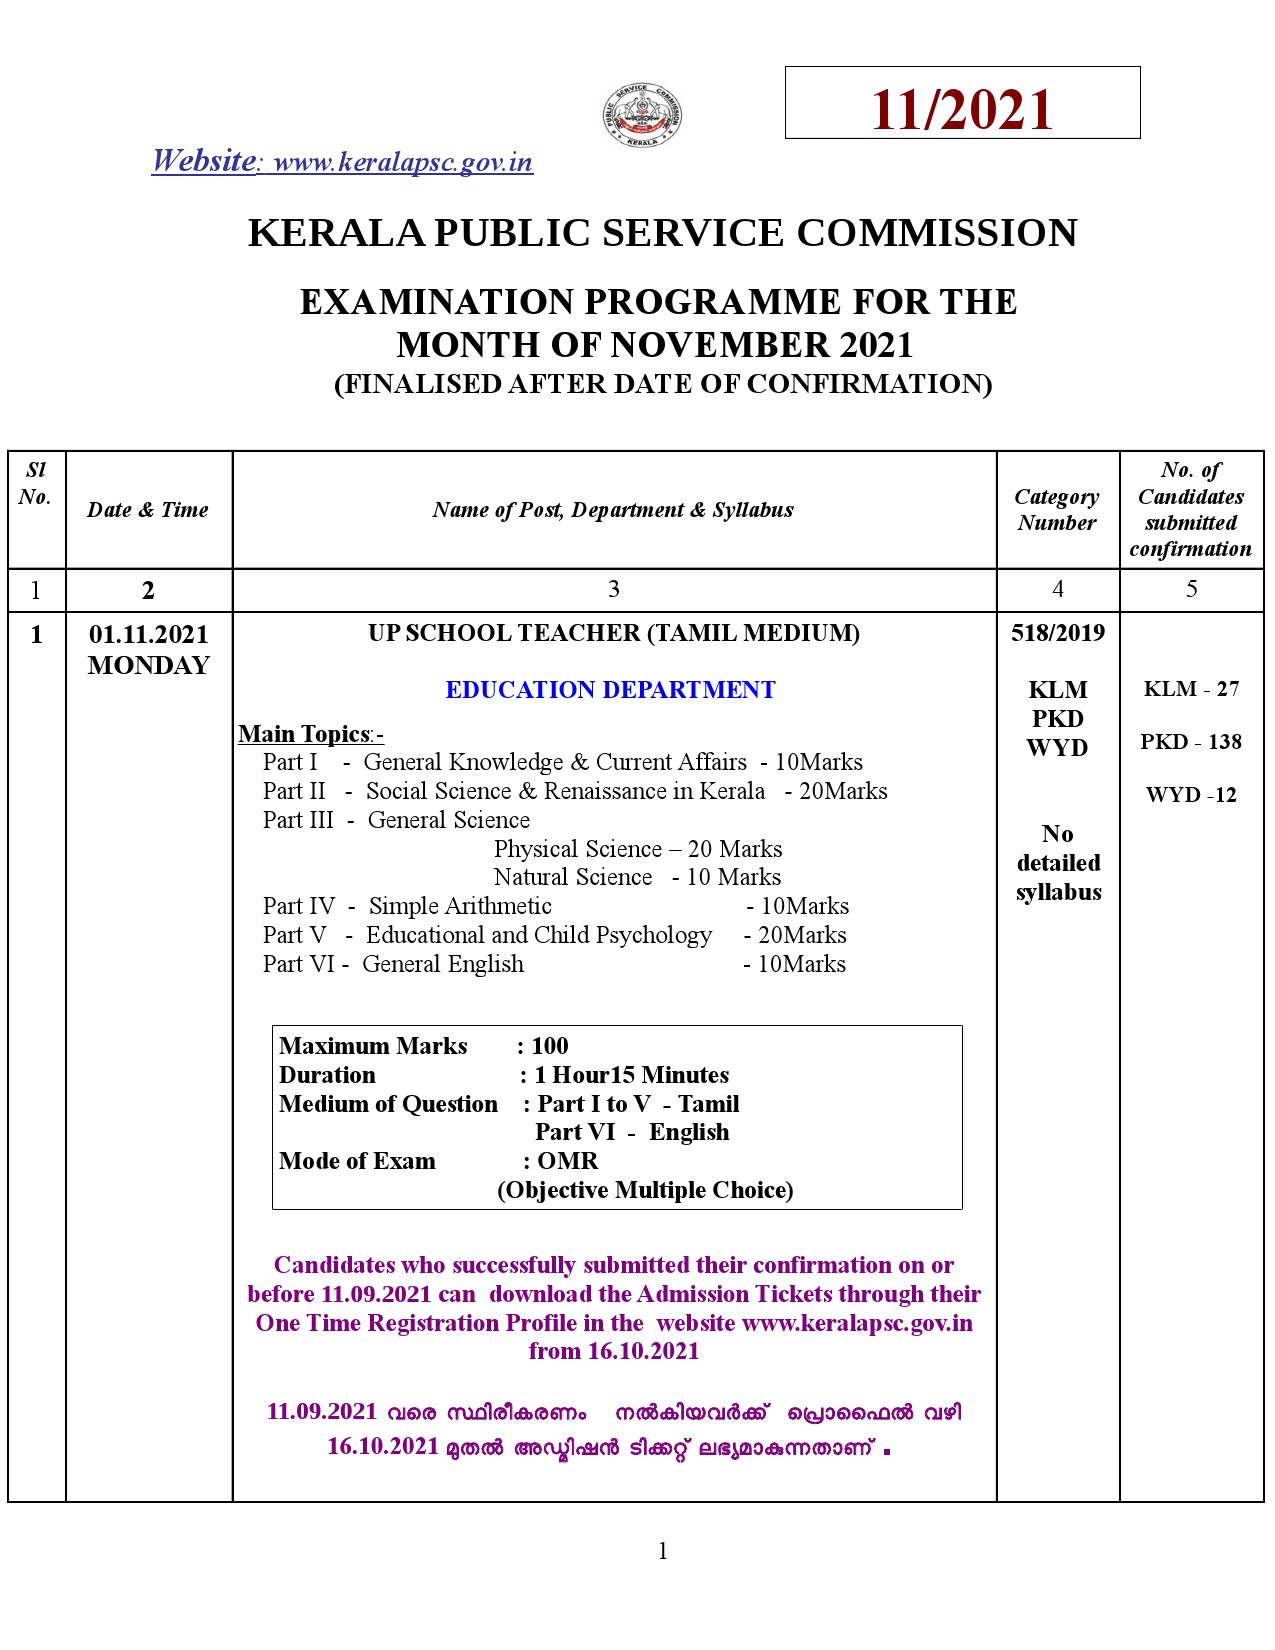 KPSC Examination Programme For The Month Of November 2021 - Notification Image 1